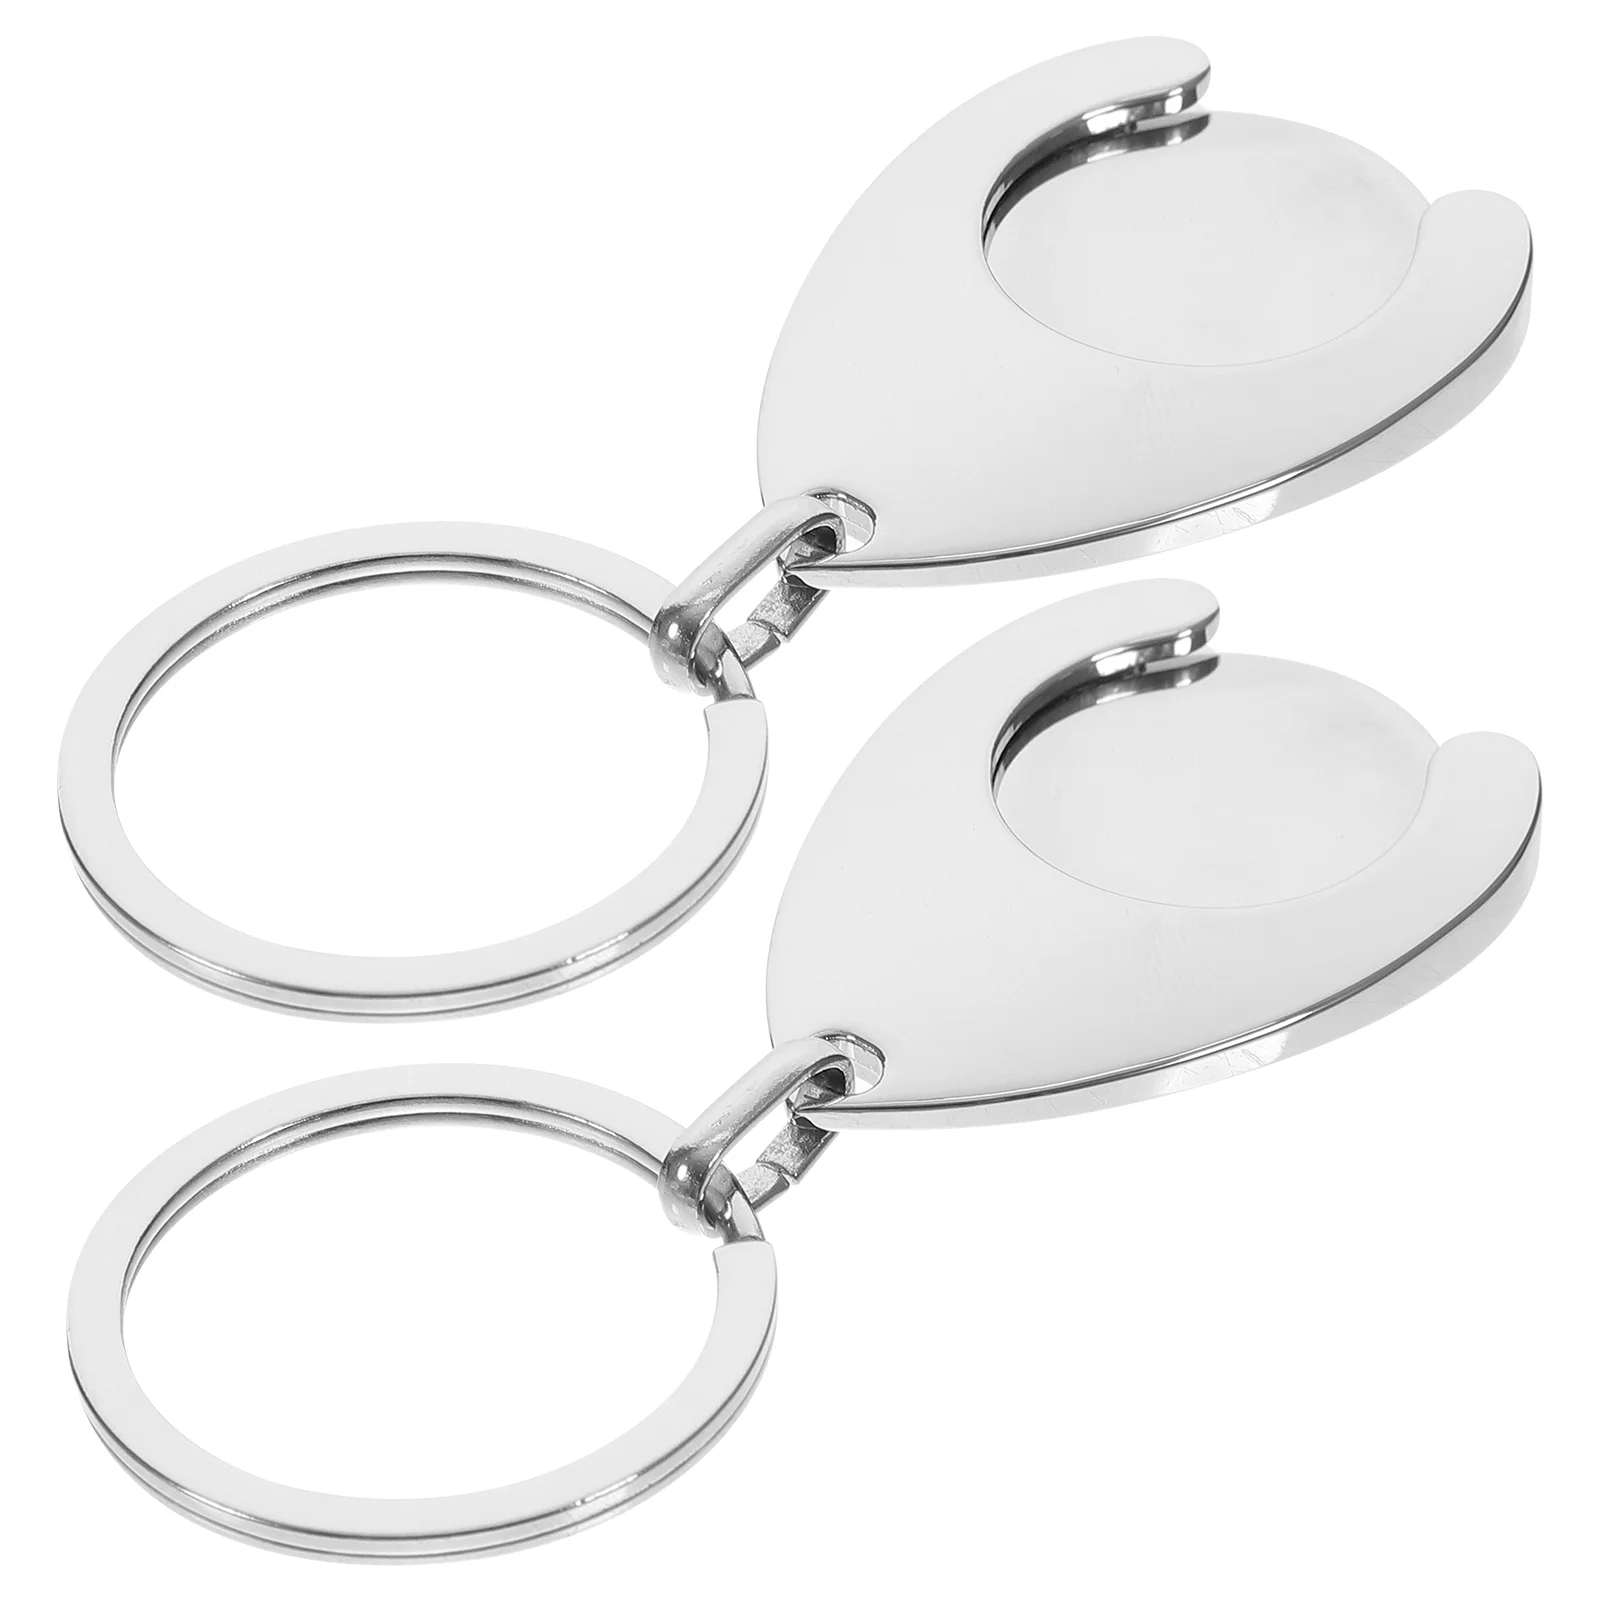 

2 Pcs Cart Token Keychain Ornament Trolley Ring Shopping Pendant Metal Small Tokens Keyrings Decoration Coins